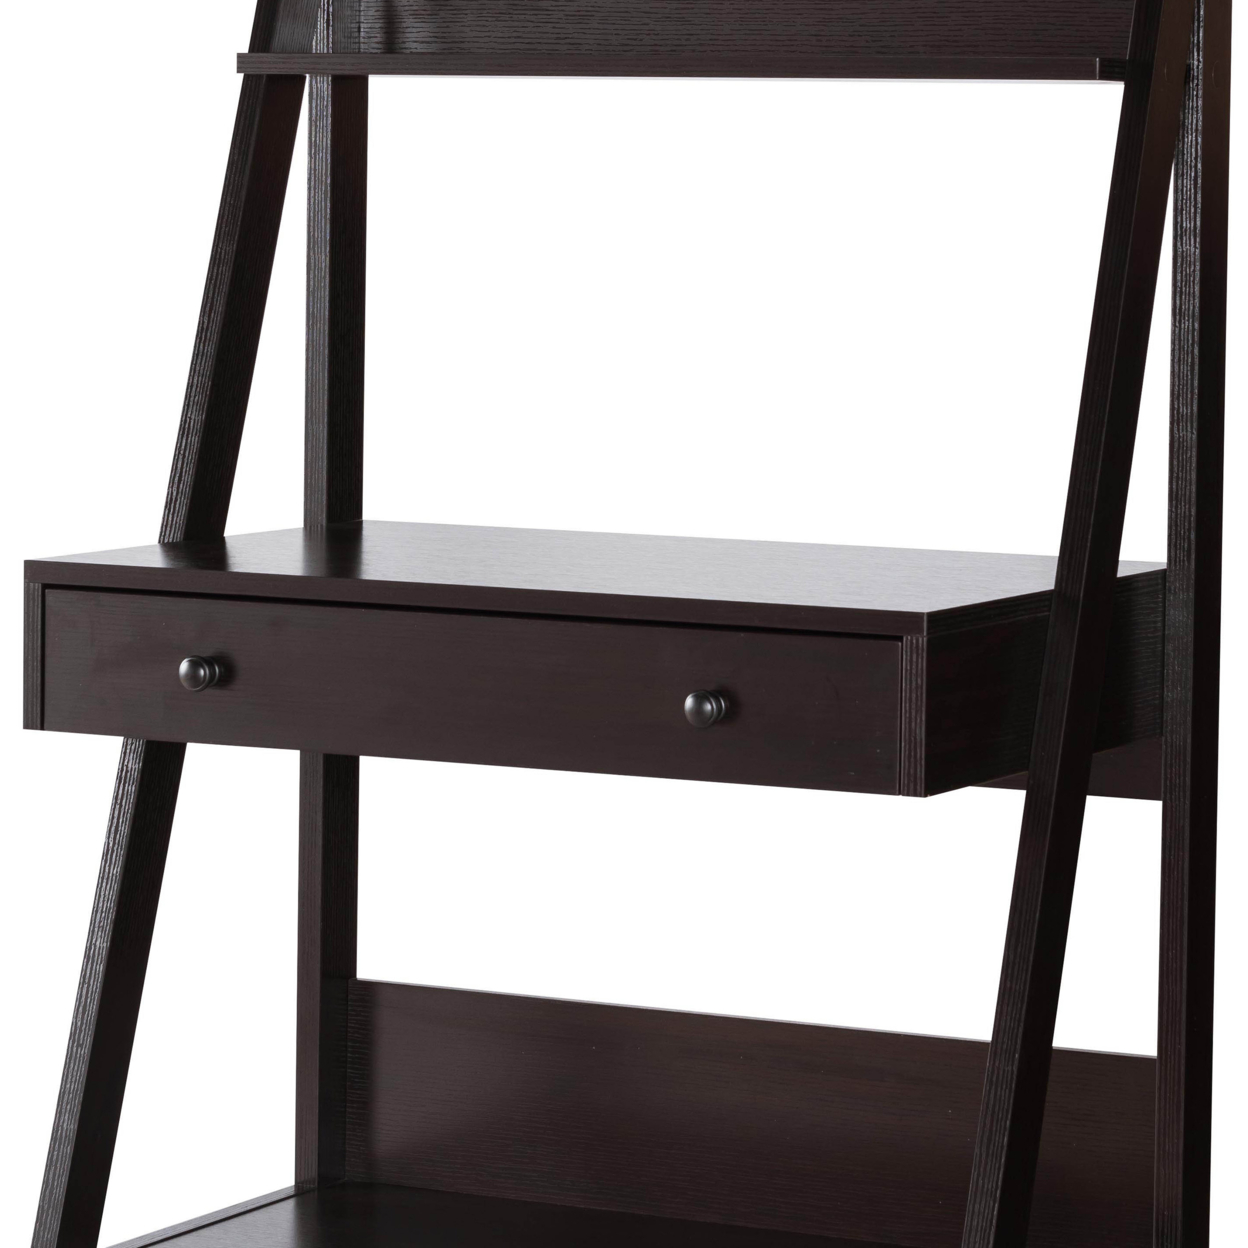 Contemporary Style Ladder Home Office Desk With 3 Open Shelves And 1 Drawer, Brown - Saltoro Sherpi